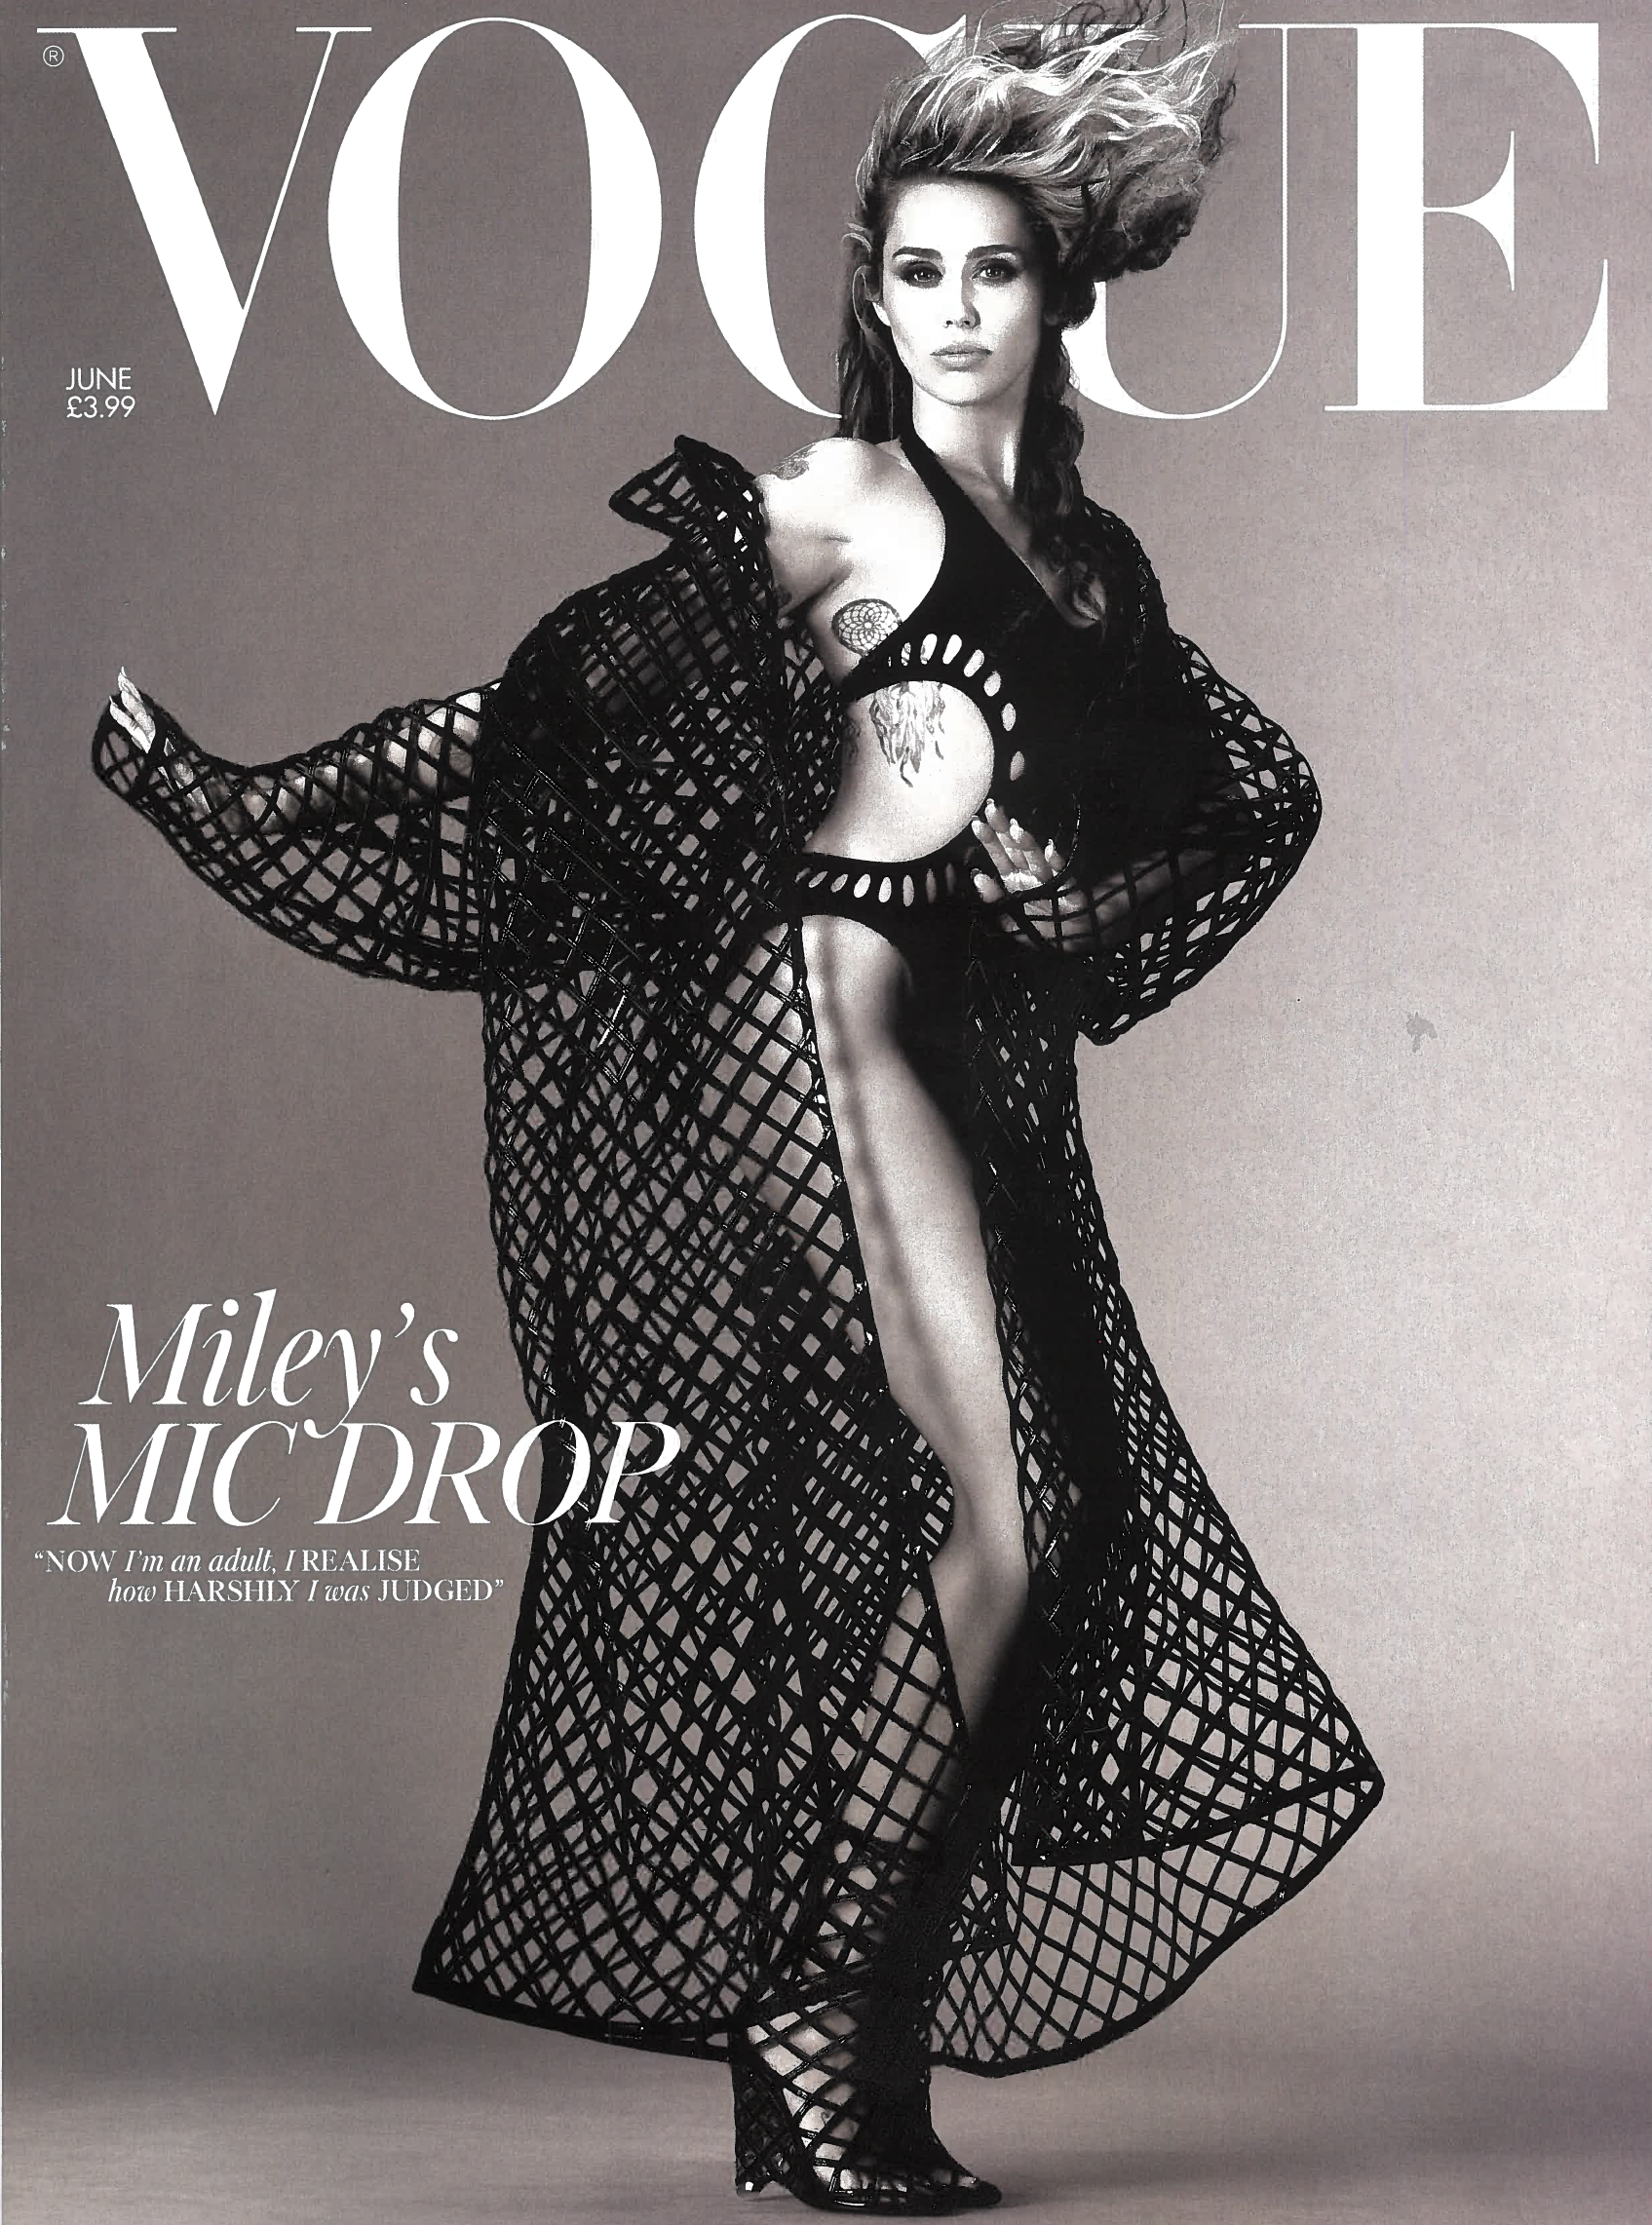 Miley cyrus on the cover of vogue magazine in a black and white photo wearing a black one piece cutout swimsuit